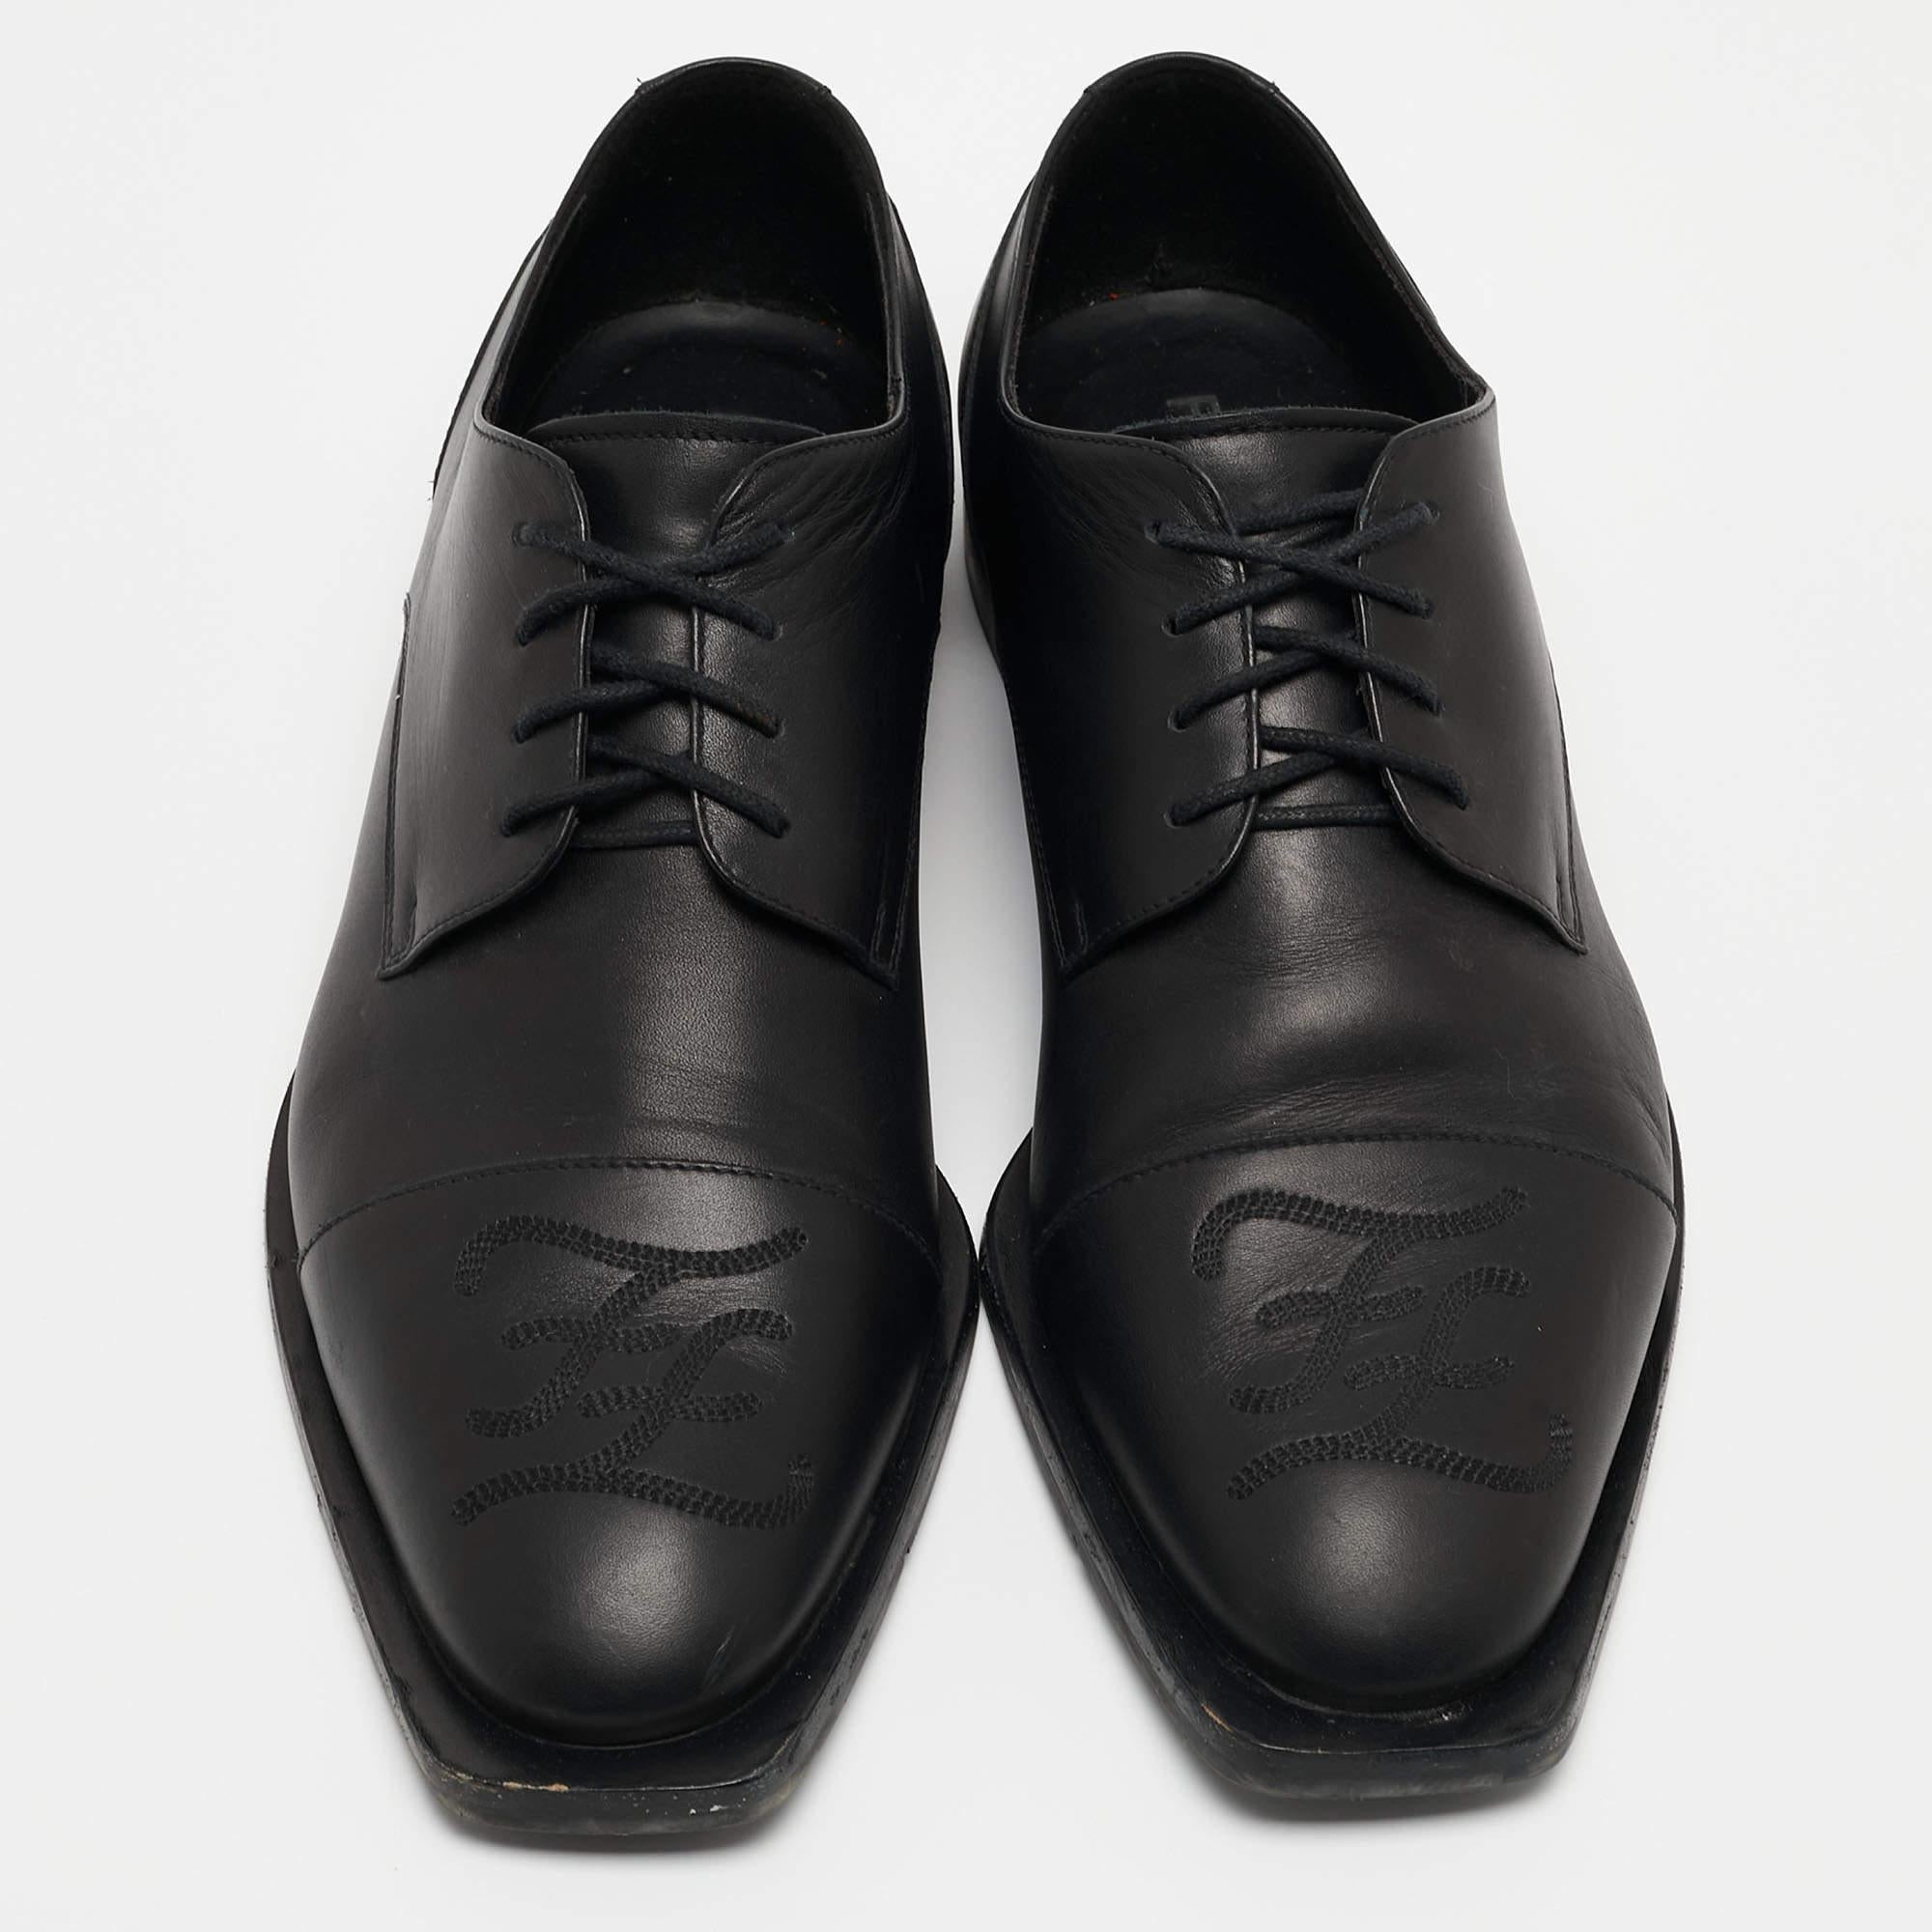 Give your outfit a luxe update with this pair of Fendi derby shoes. They are sewn perfectly to help you make a statement in them for a long time.

